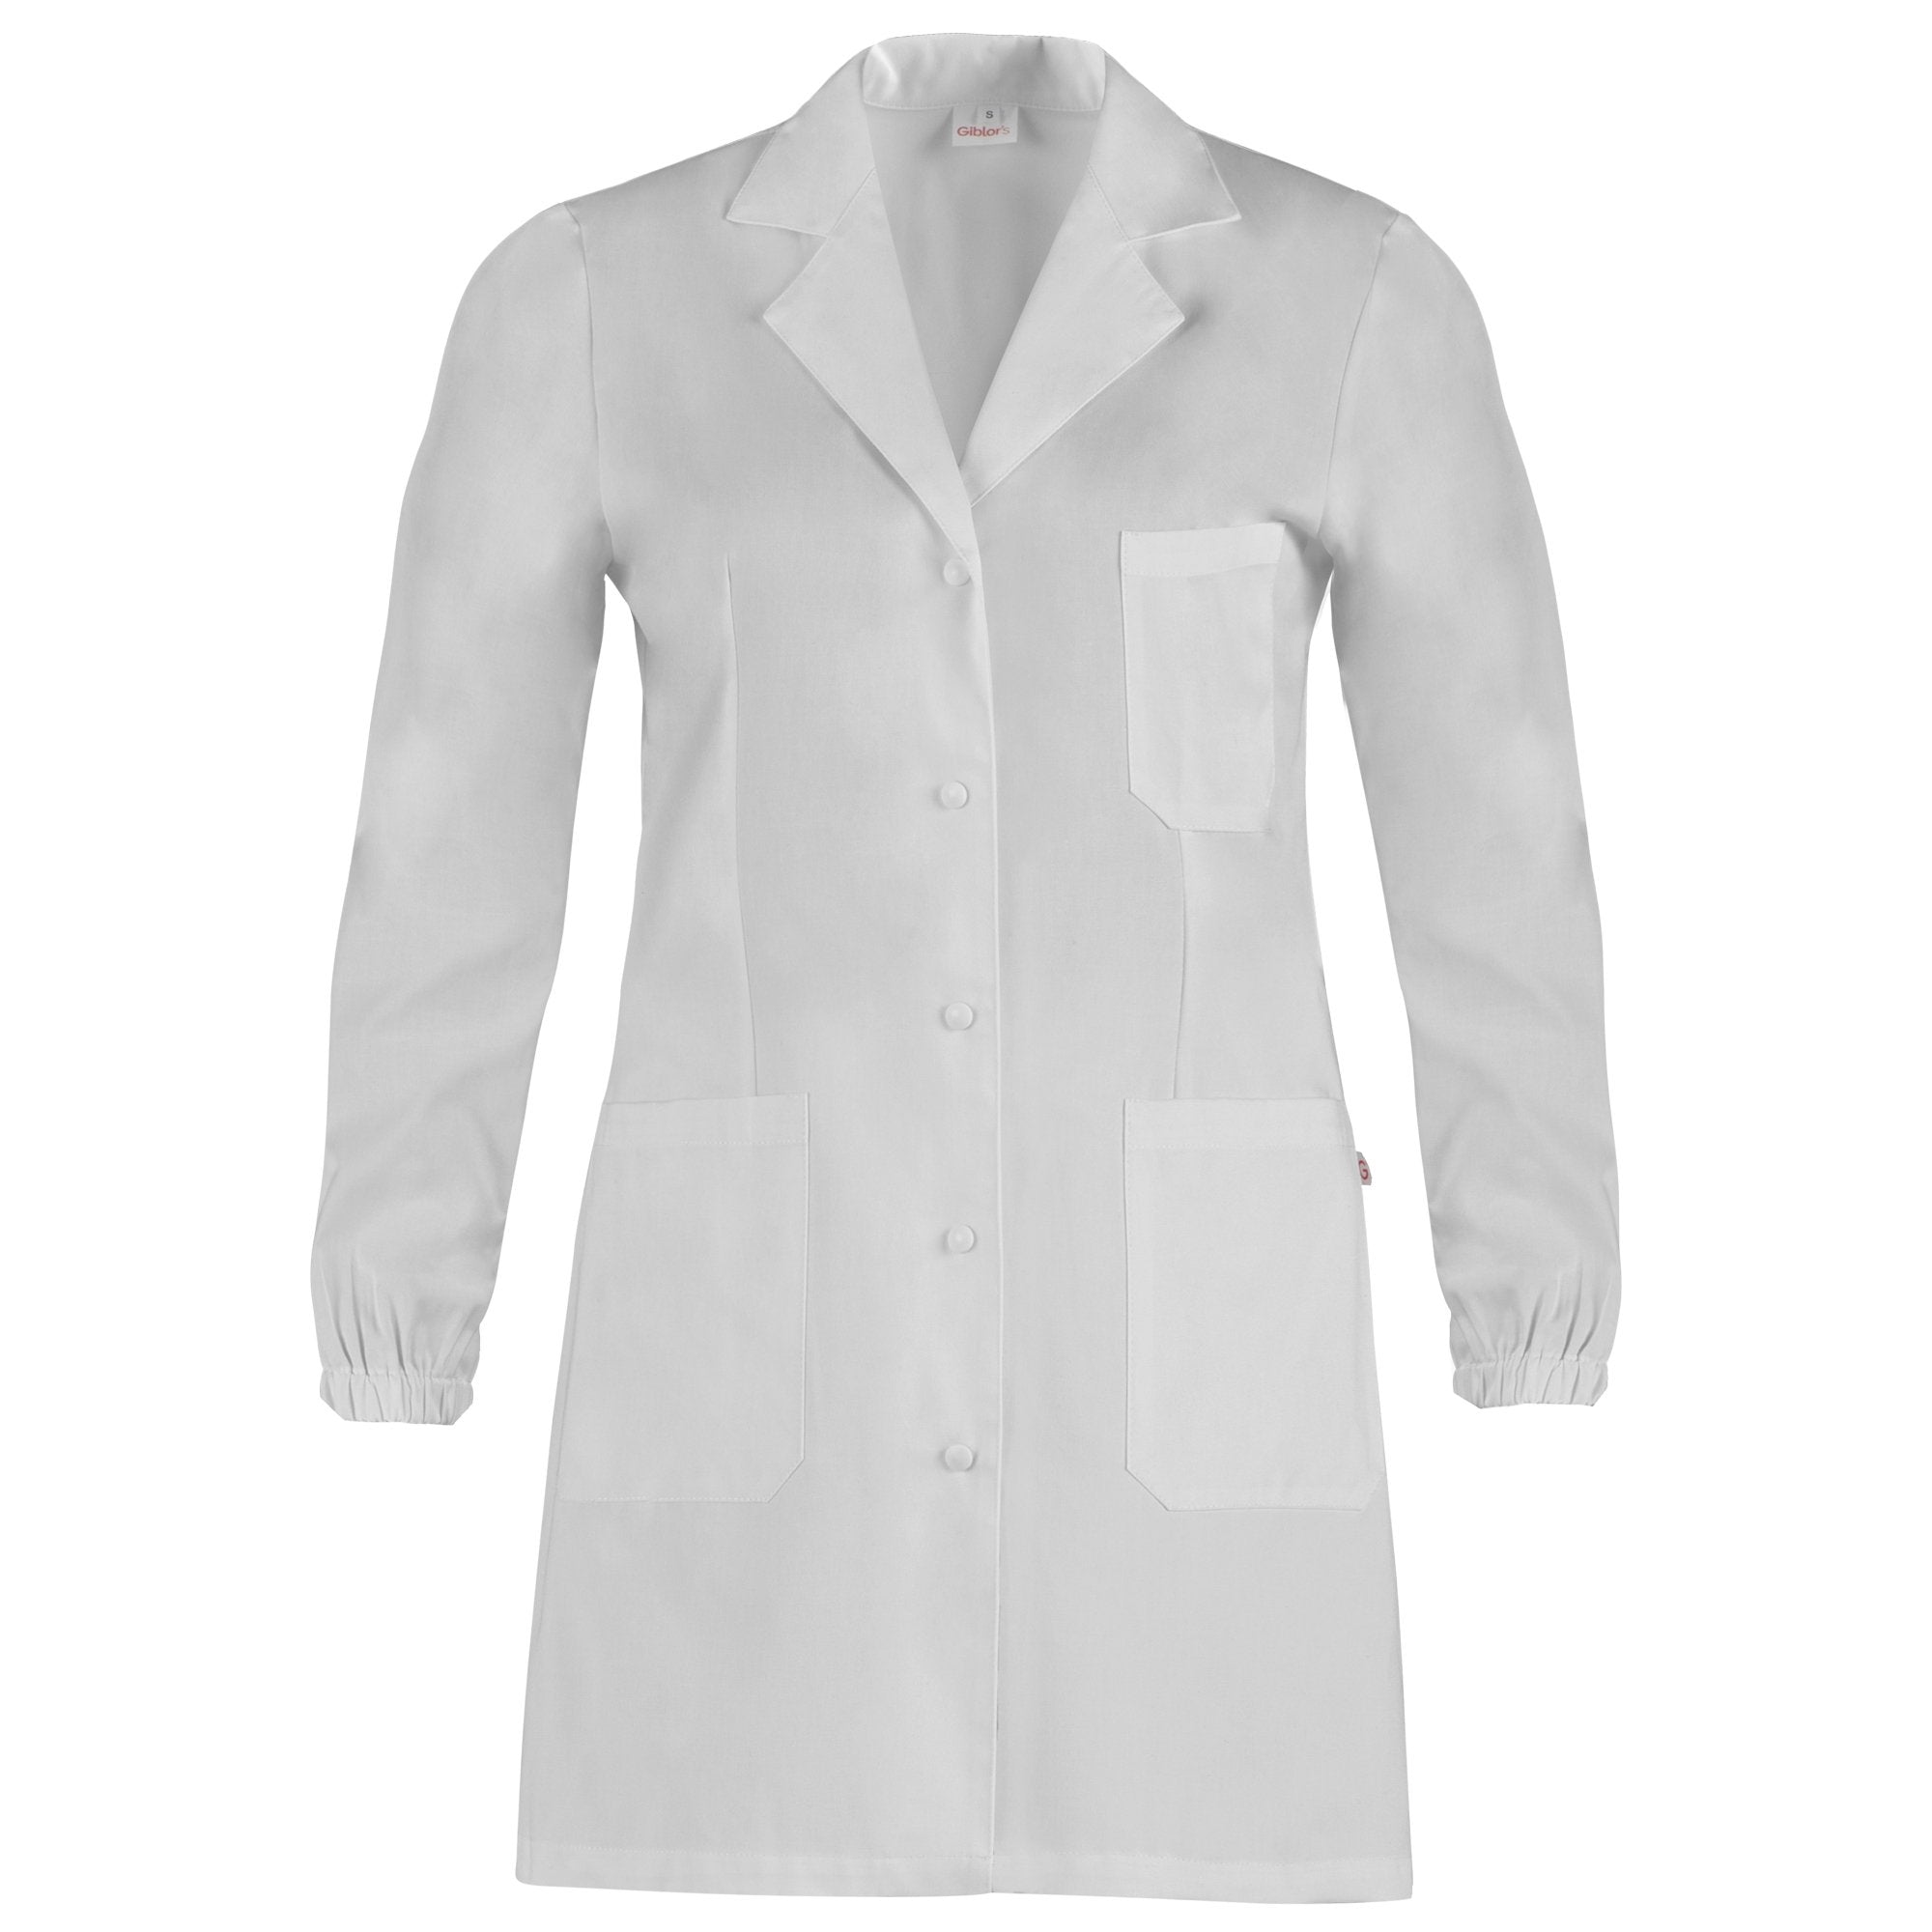 giblor's-camice-ospedaliero-milly-donna-tg-l-bianco